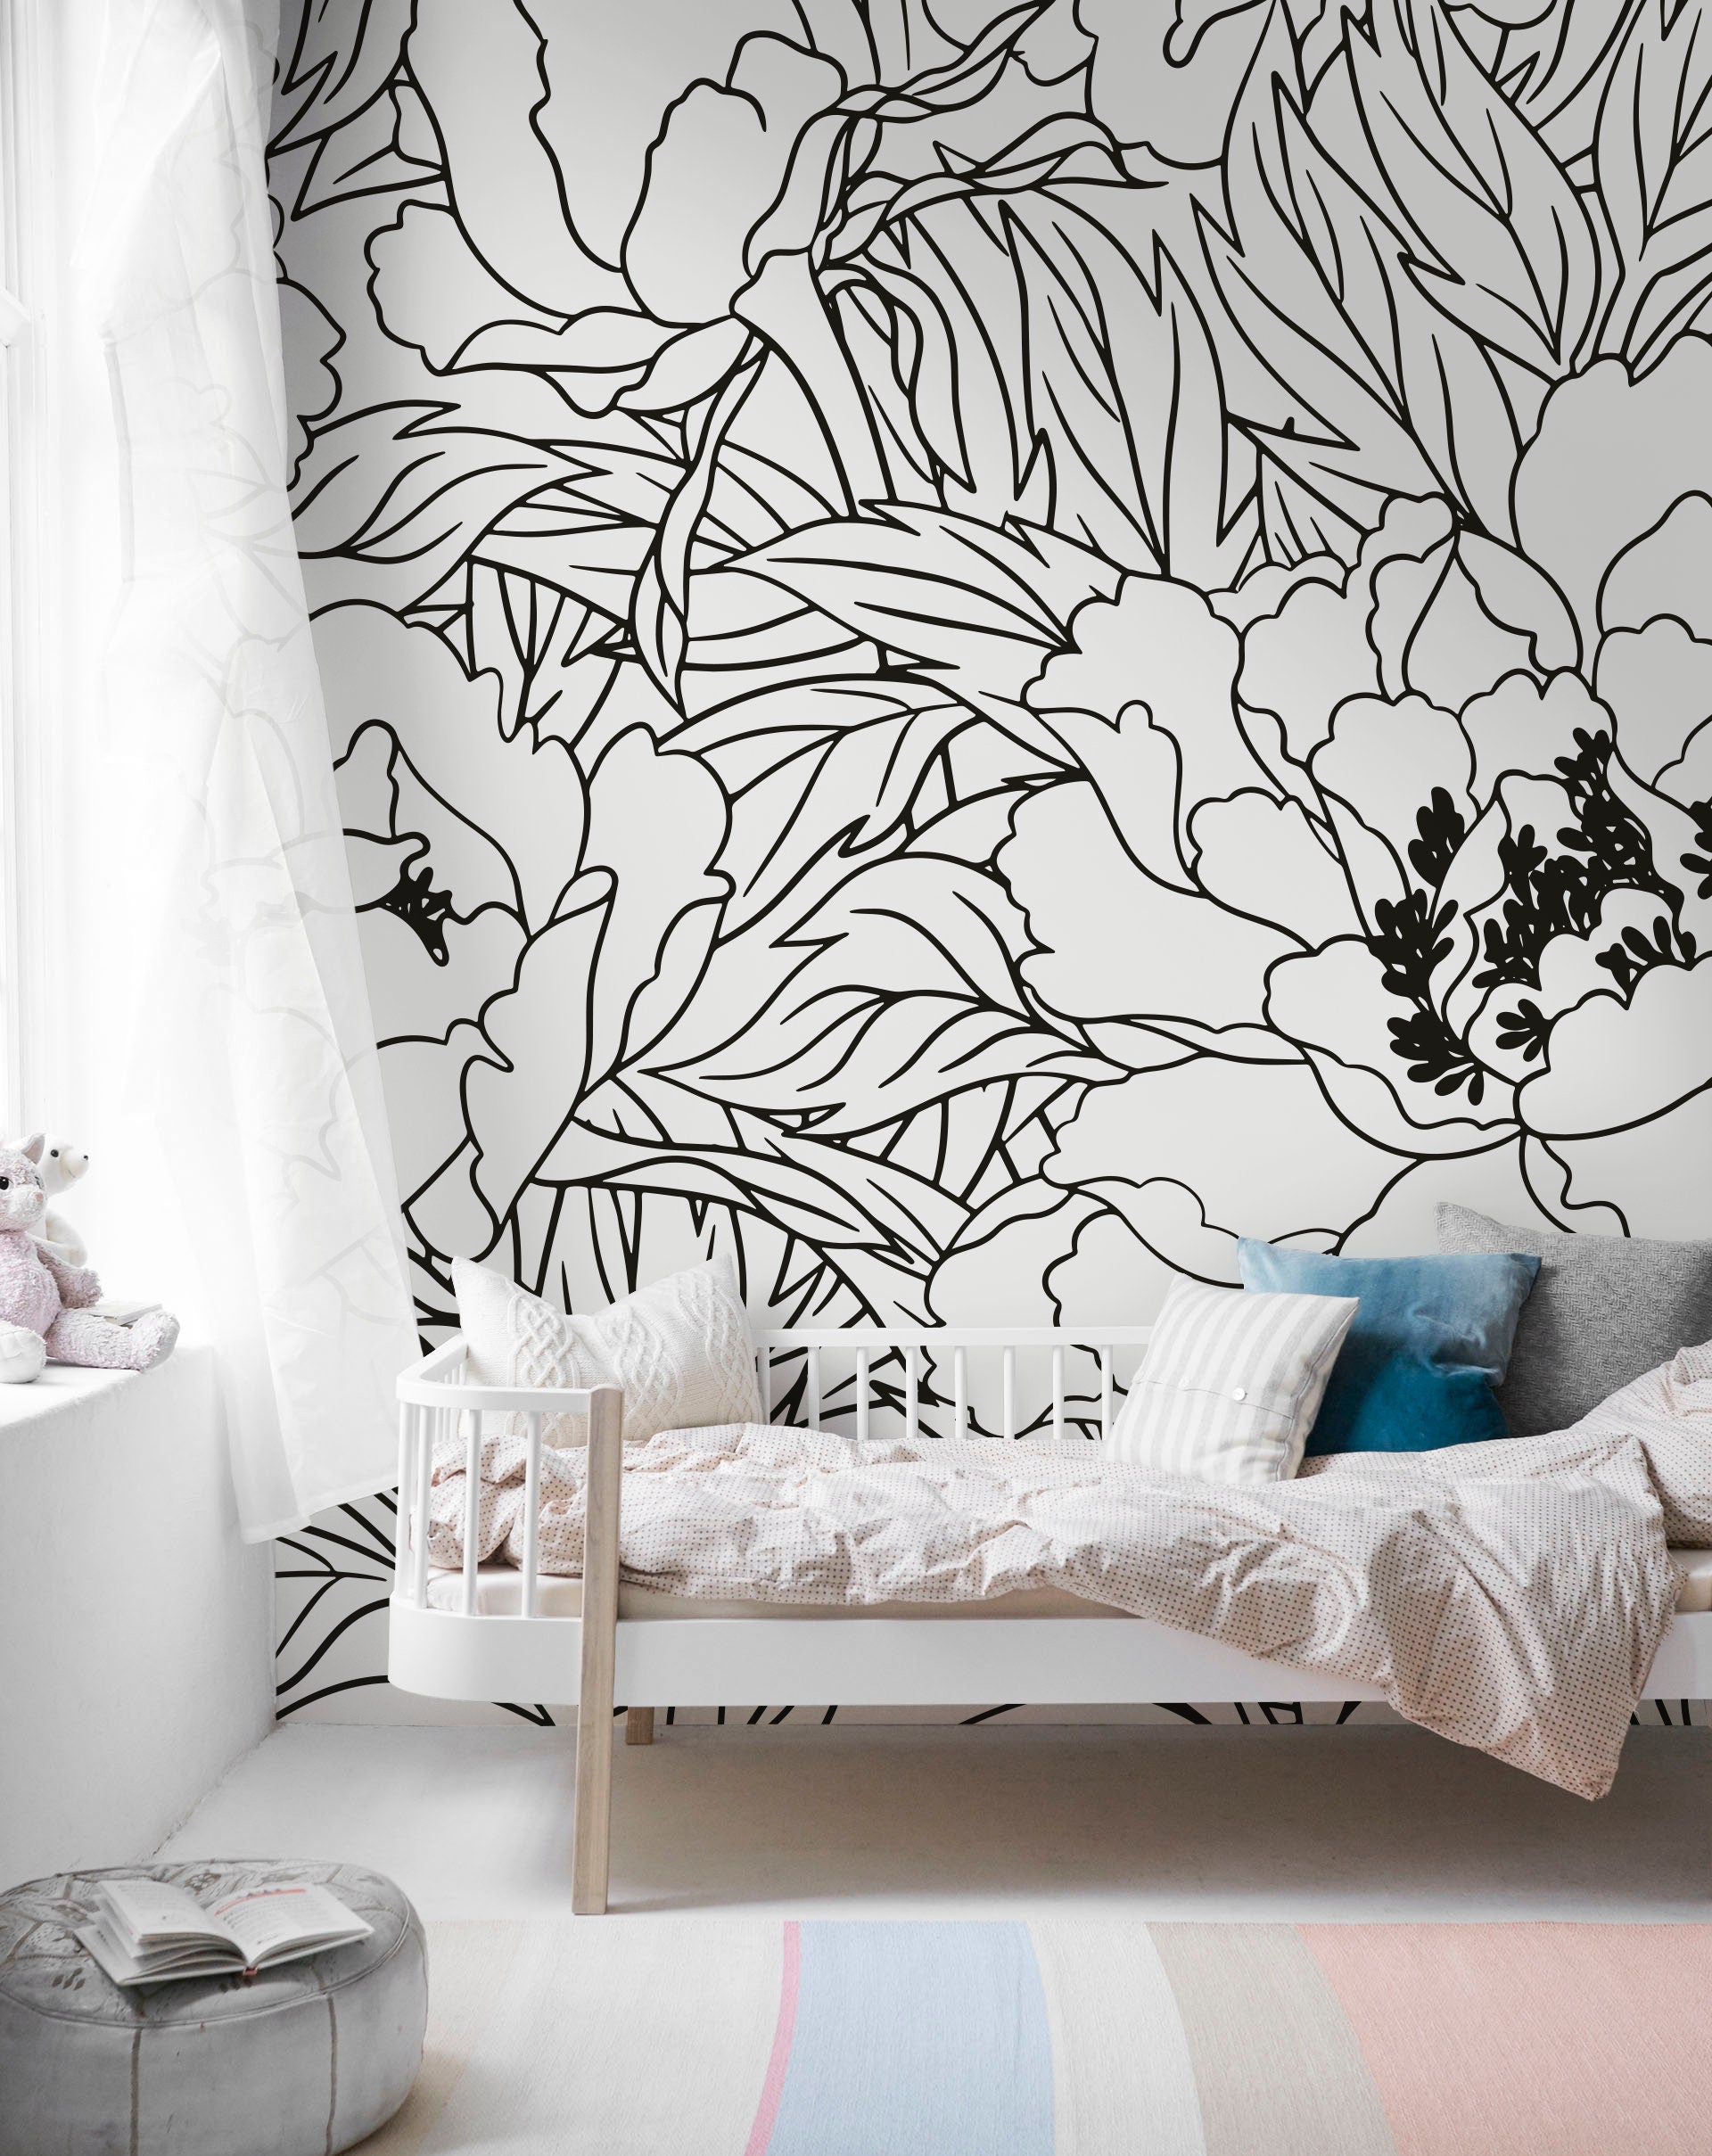 Black and White Large Floral / Wallpaper Peel and Stick Wallpaper Removable Wallpaper Home Decor Wall Art Wall Decor Room Decor - C919